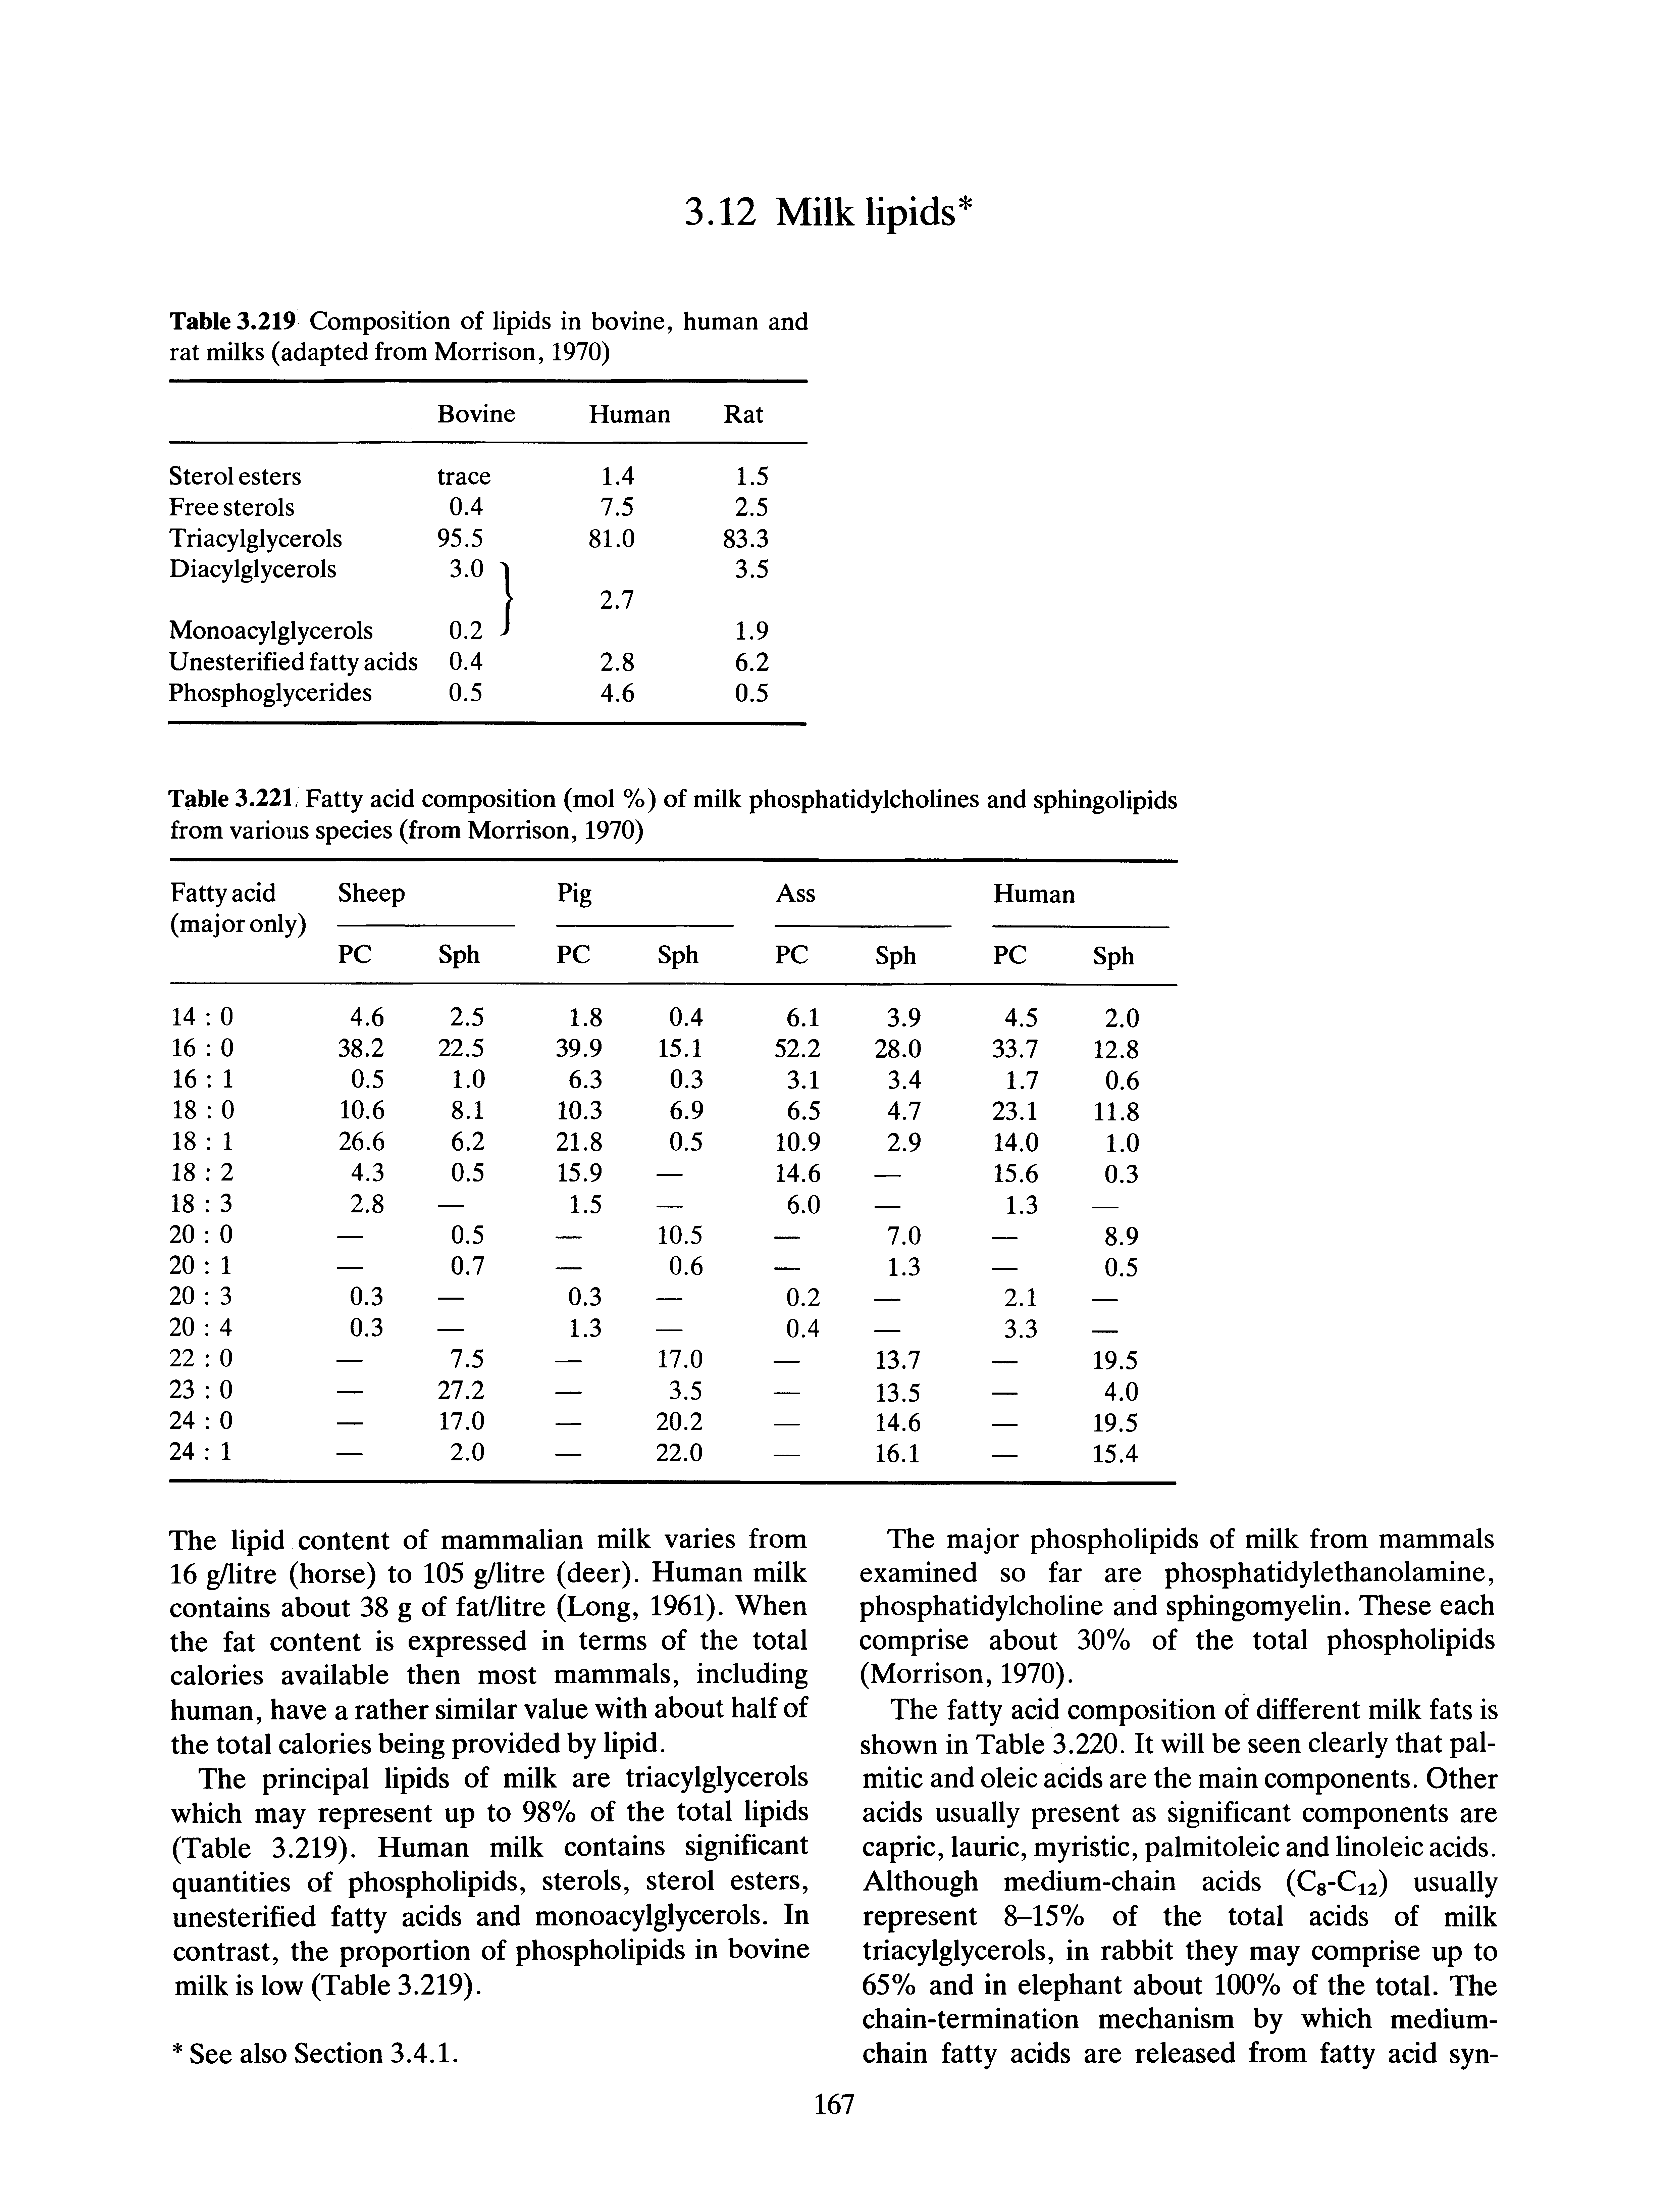 Table 3.221. Fatty acid composition (mol %) of milk phosphatidylcholines and sphingolipids from various species (from Morrison, 1970)...